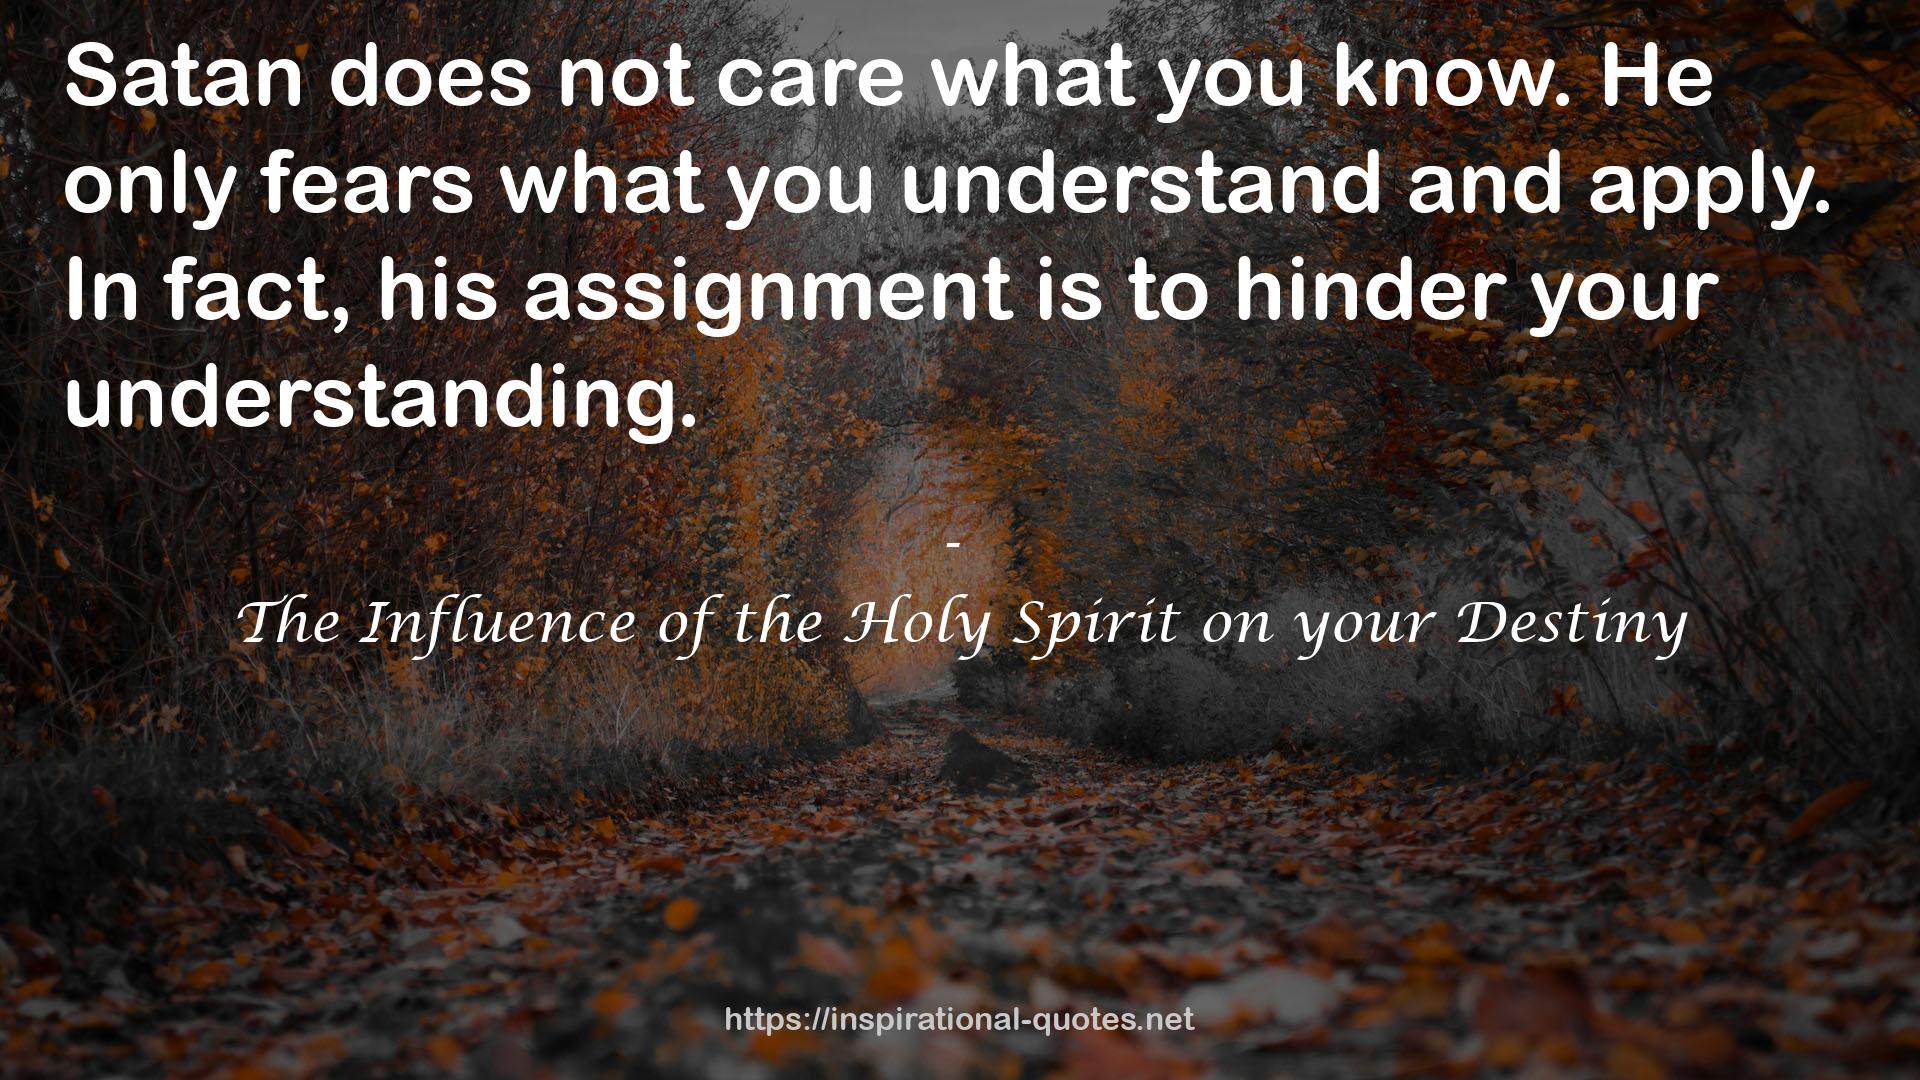 The Influence of the Holy Spirit on your Destiny QUOTES